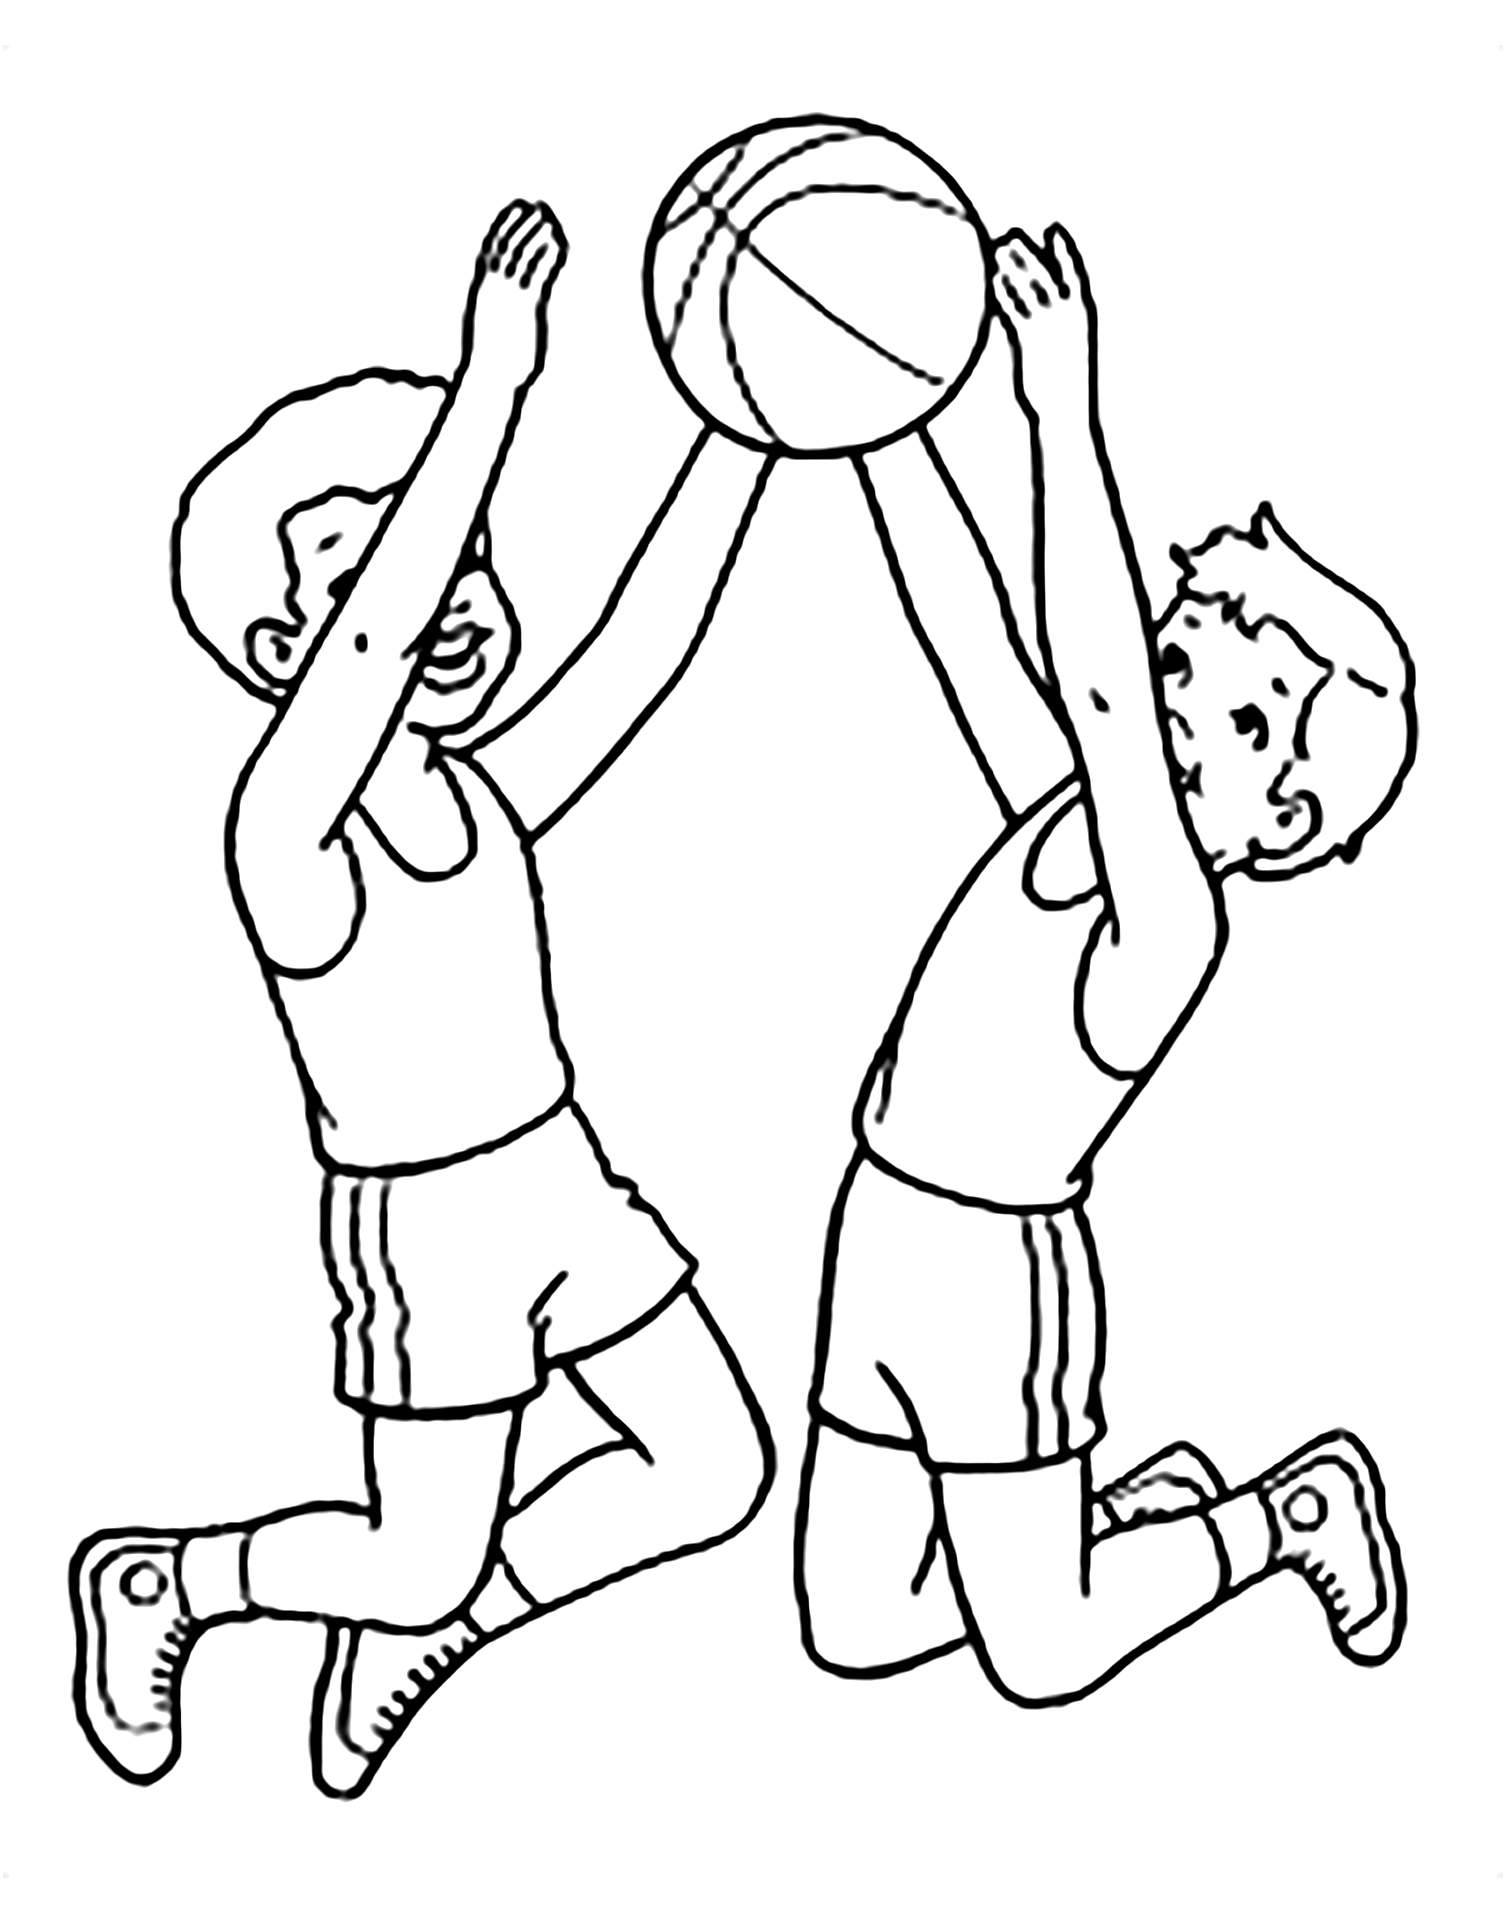 Download Basketball for children - Basketball Kids Coloring Pages